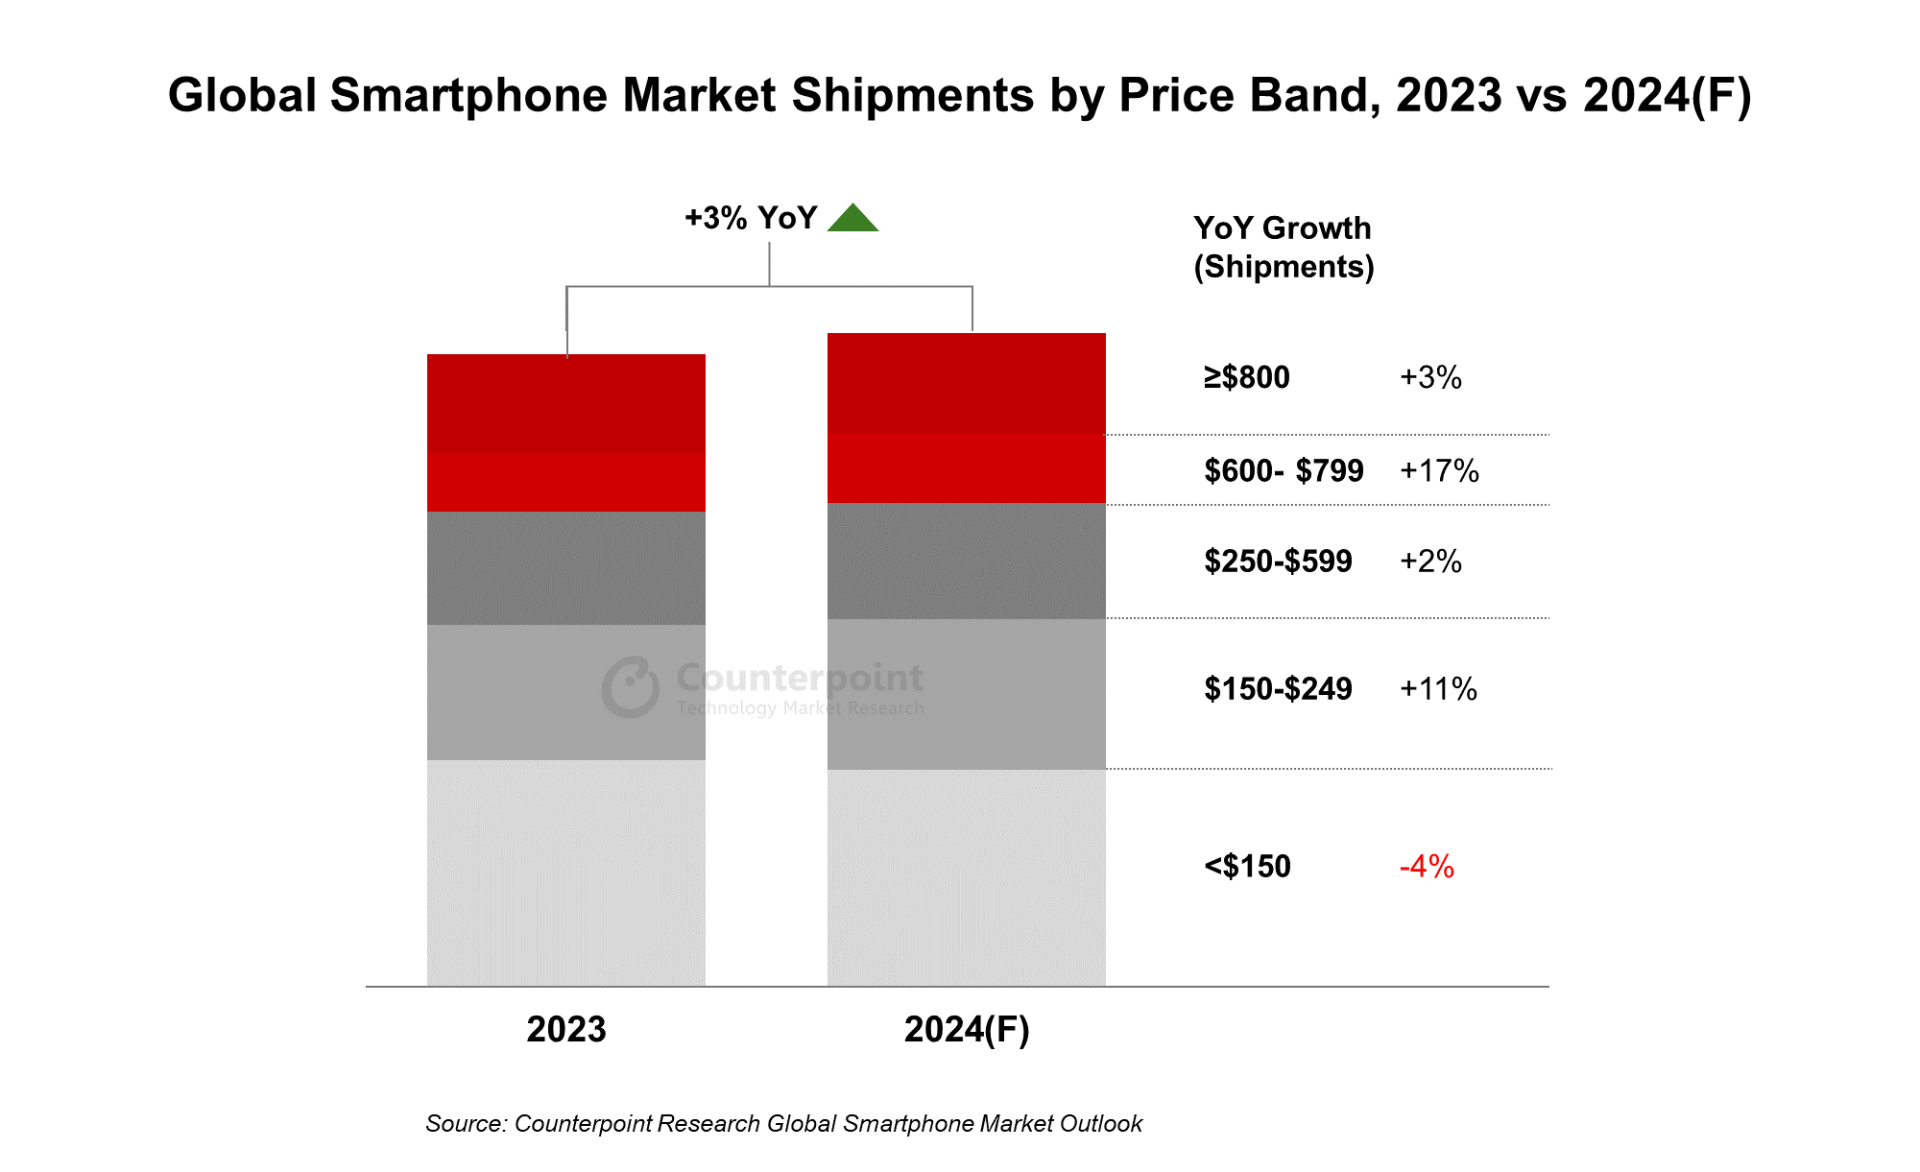 Global-Smartphone-Market-Shipments-by-Price-Band-2023-vs-2024F